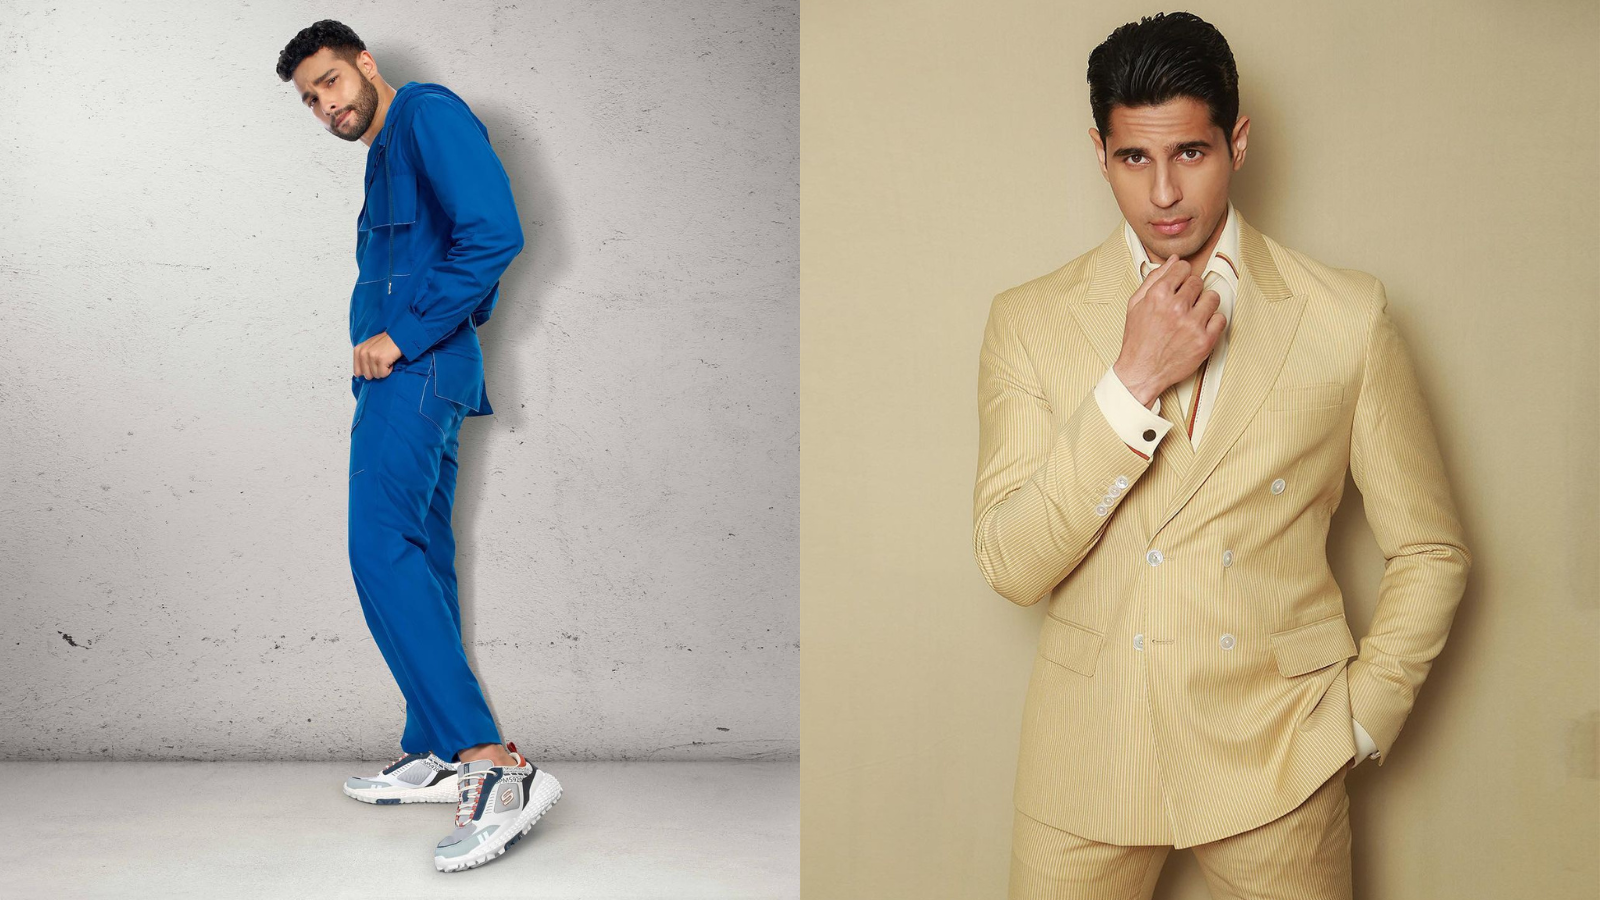 Ranveer Singh To Sidharth Malhotra: 5 Bollywood Actors In Charming White  Suits